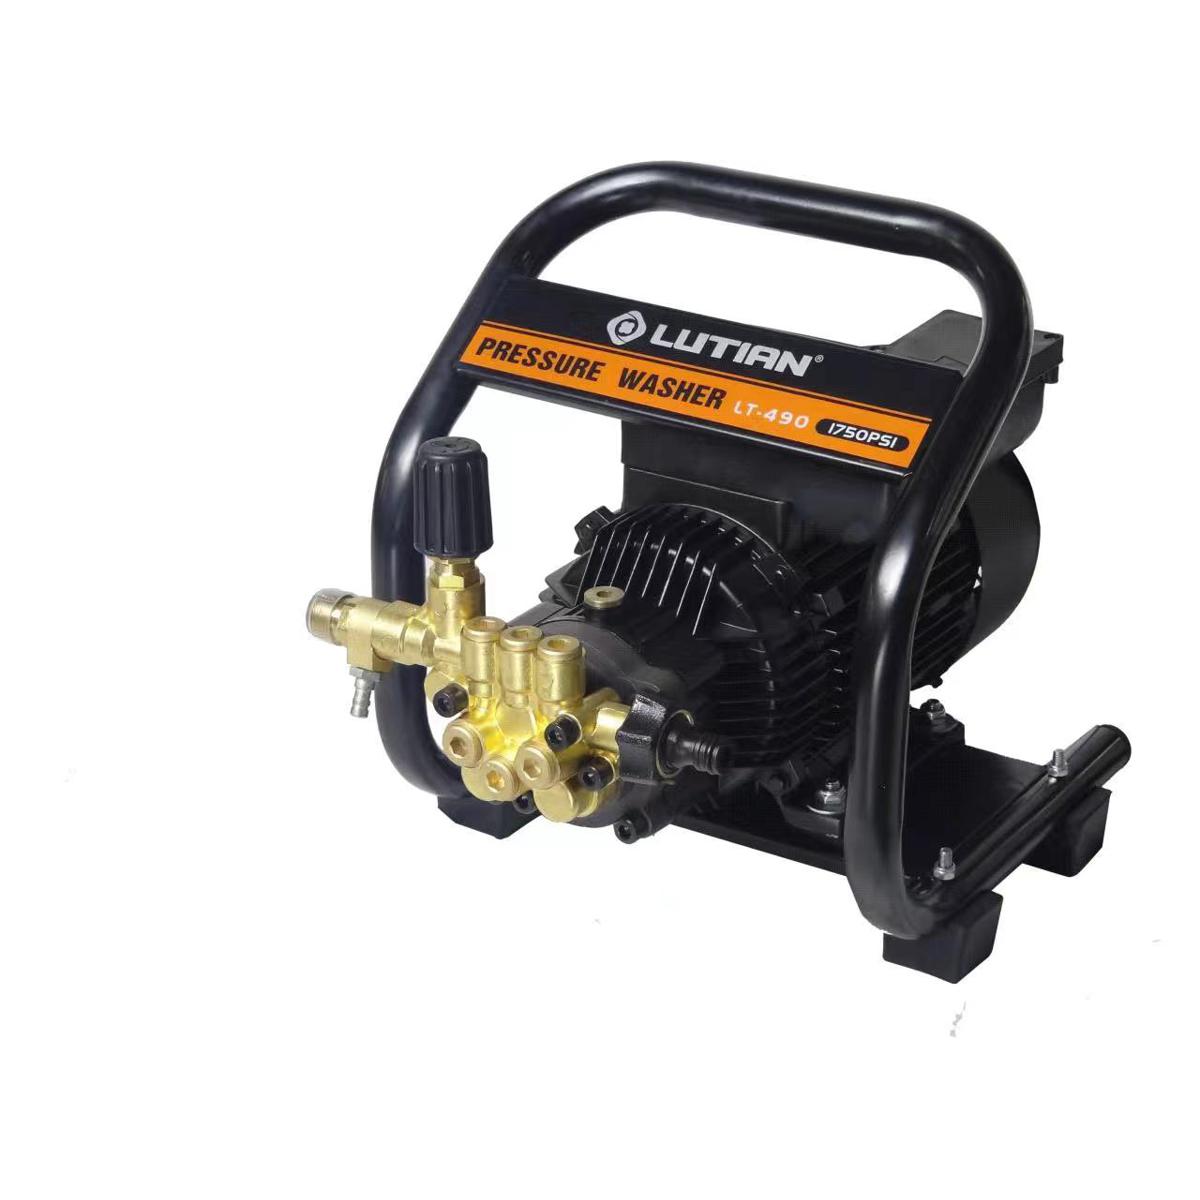 LUTIAN - LT490 - 1800 Ws - 2.5 HP - 120 Bar - Commercial Induction Motor High Pressure Washer - Self Priming - Portable